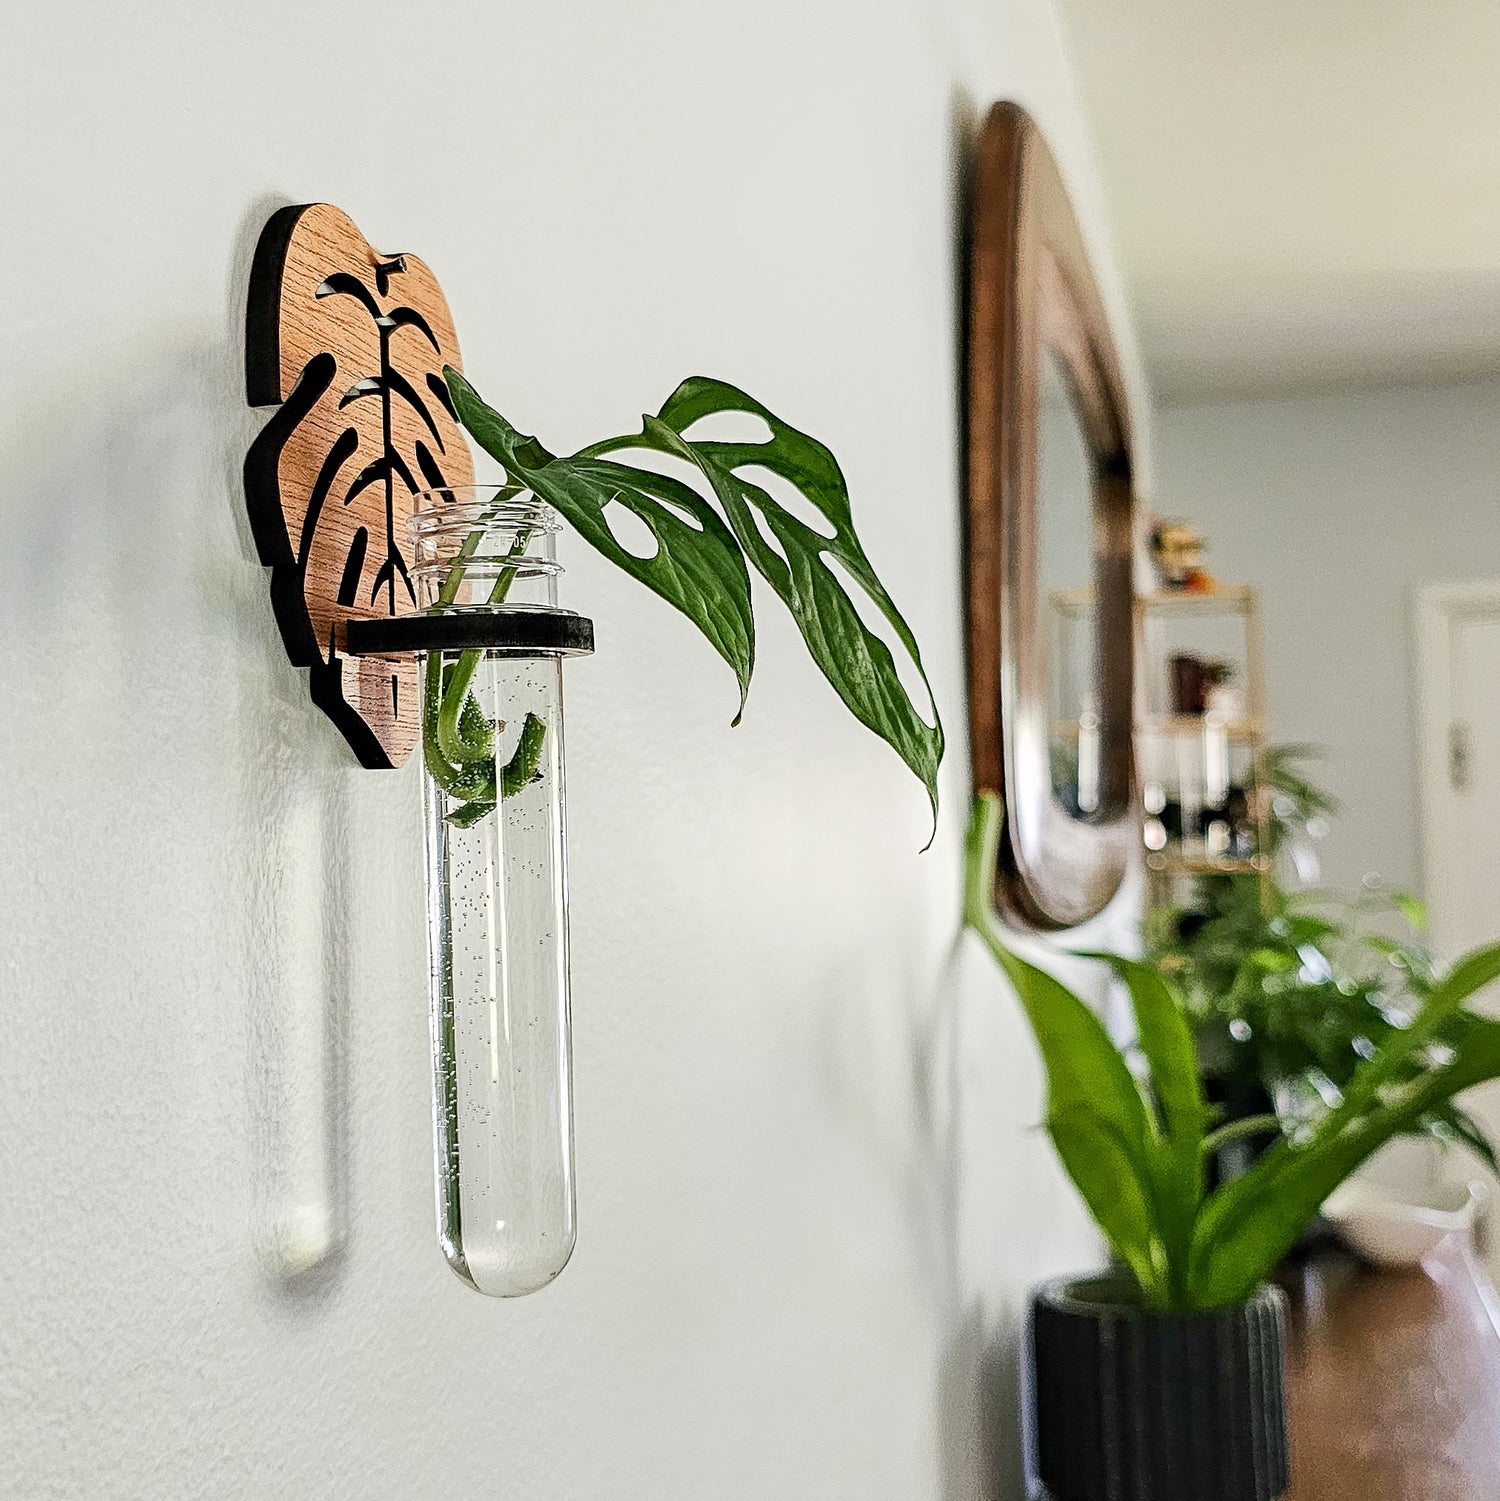 Wall hanging test tube propagation station for growing roots on plant cuttings in water. Small, dark colored wood plant hangers in a monstera leaf design with monstera adansonii cuttings.